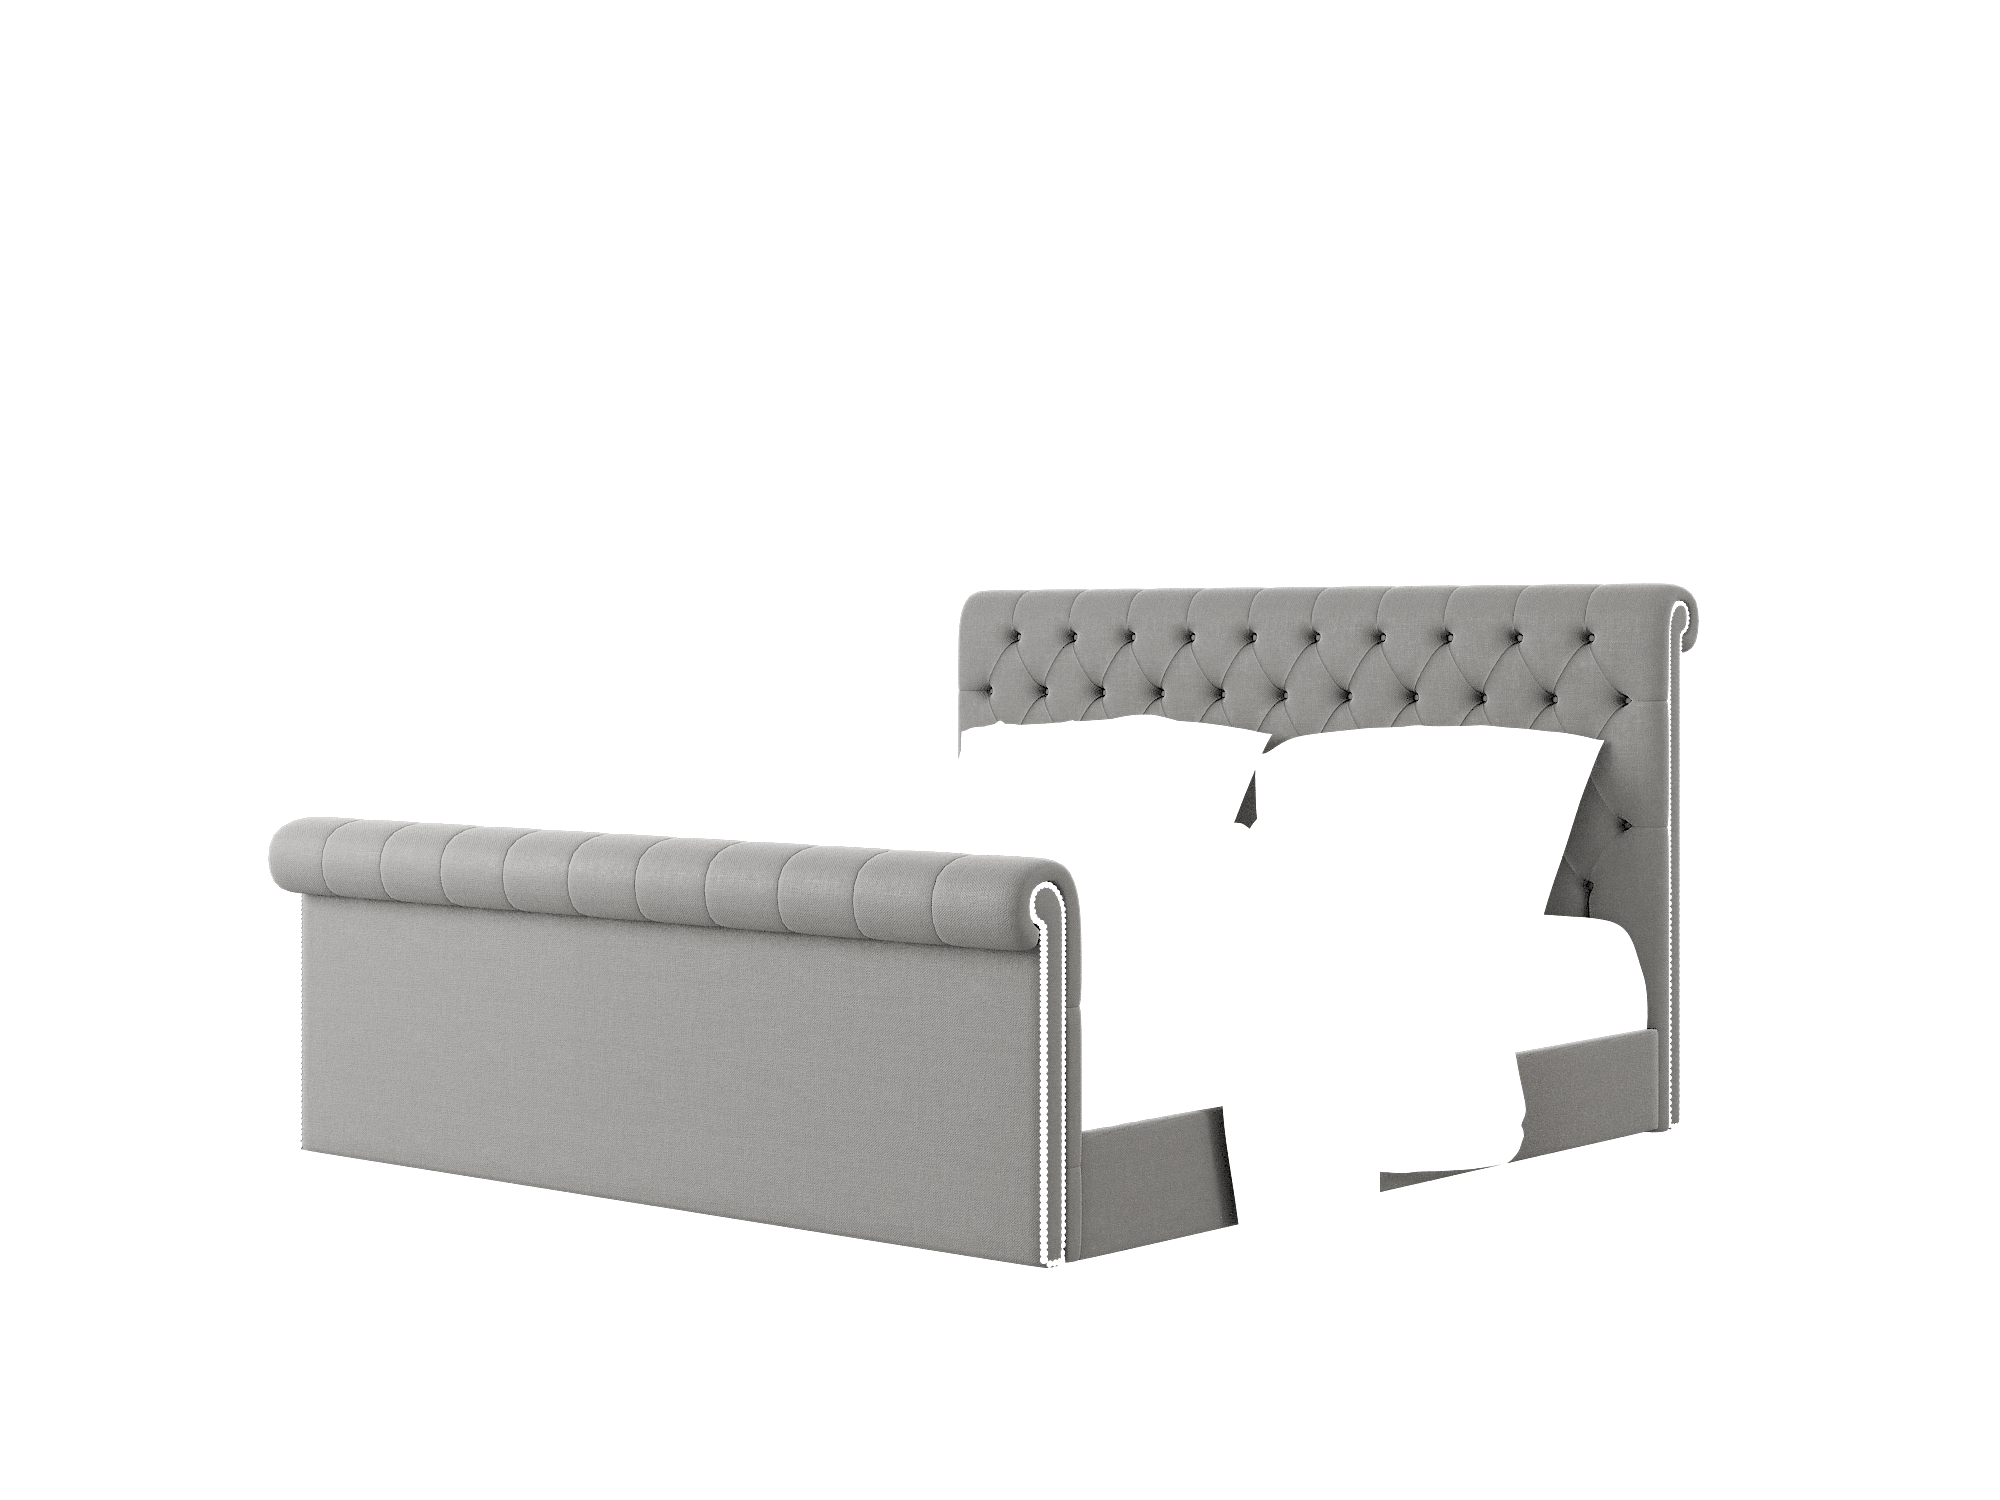 Kaila Rocket Charcoal Bed King Room Texture